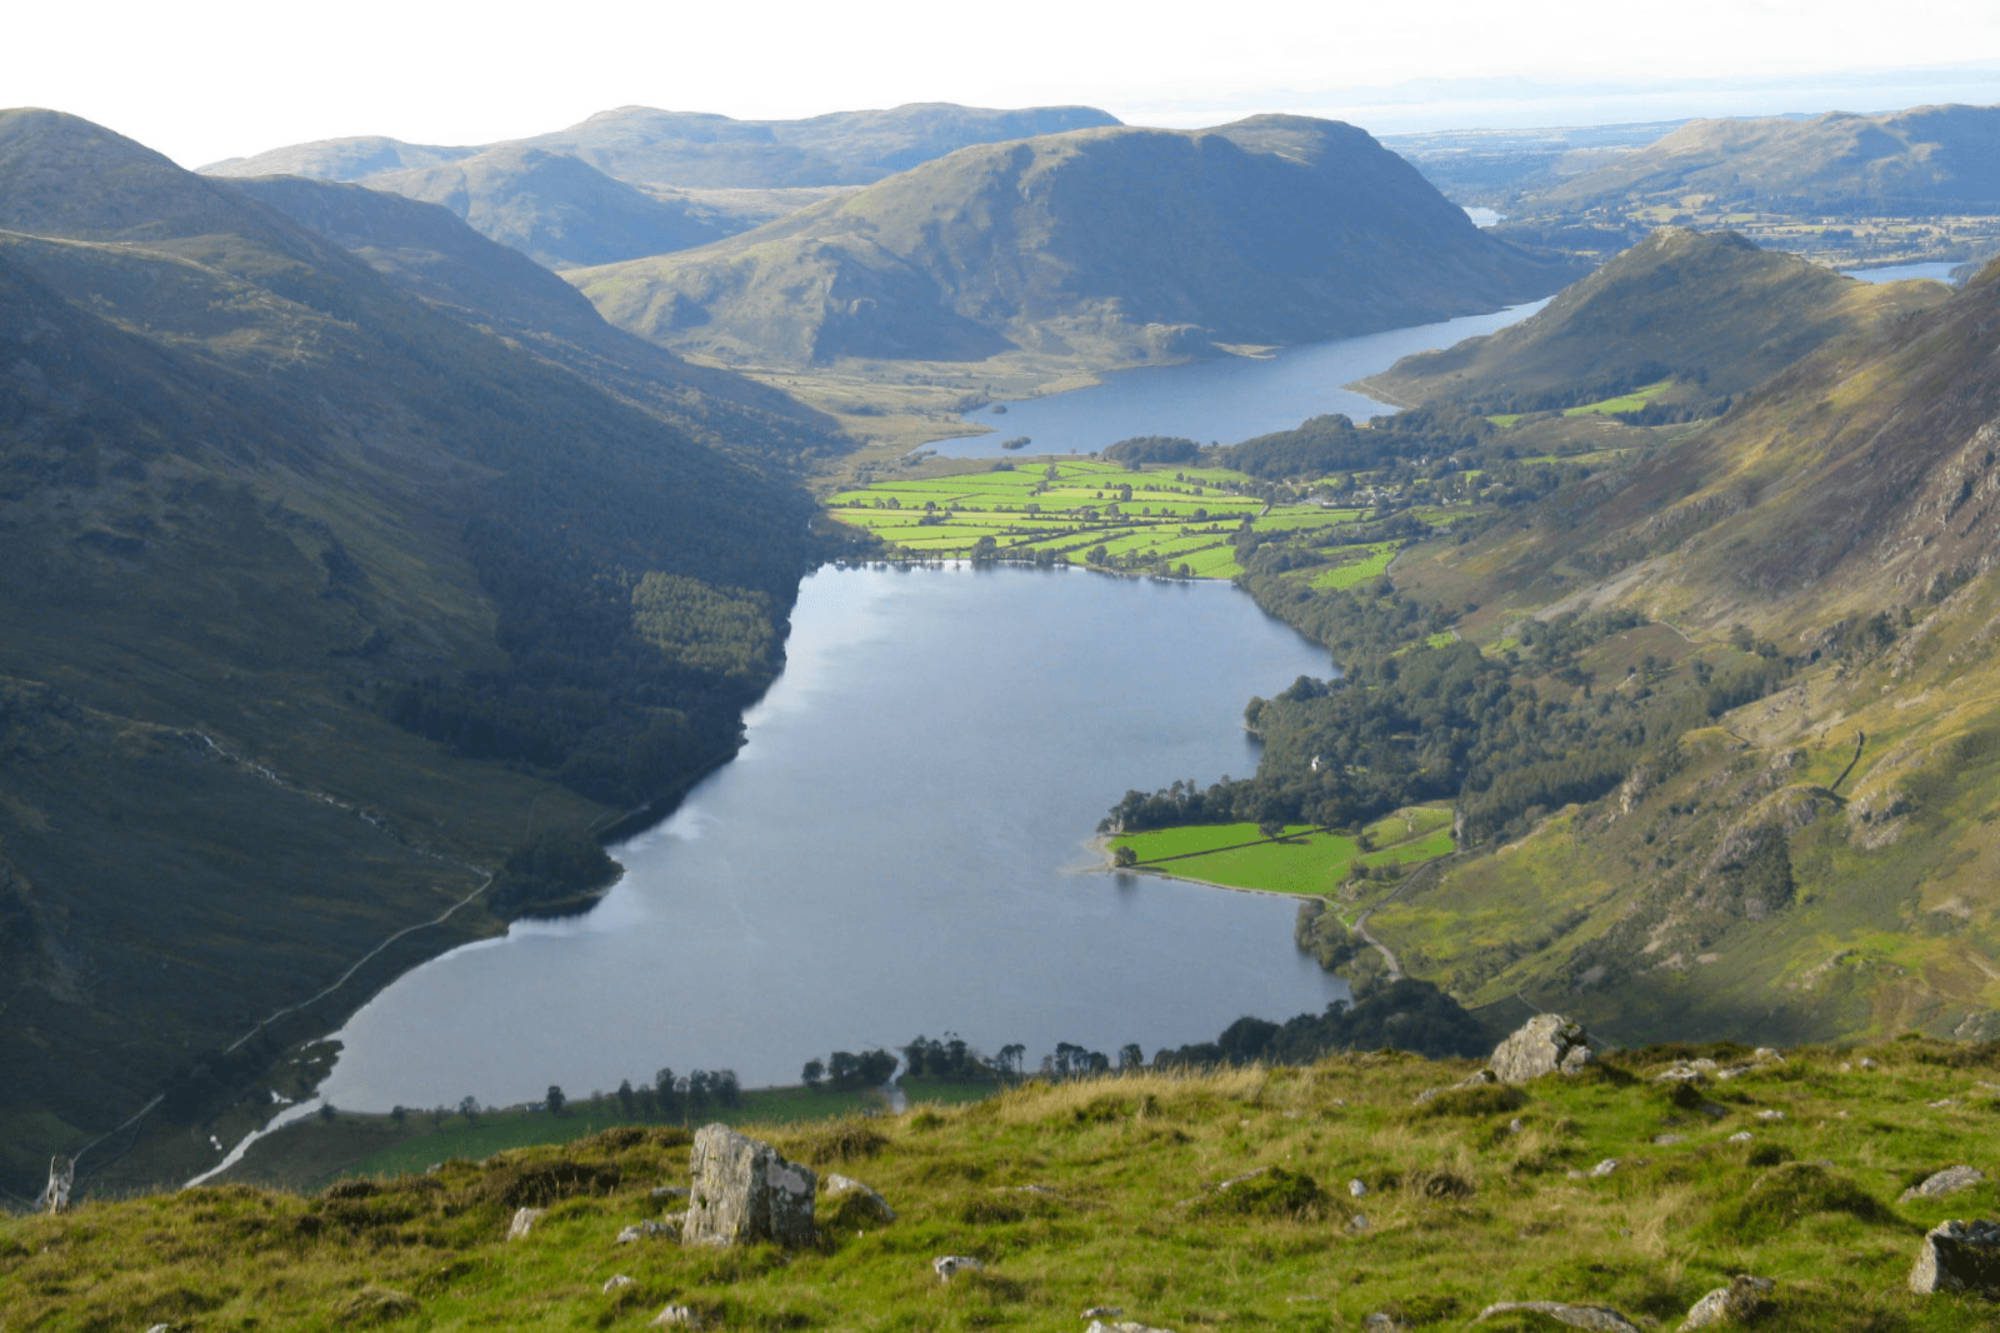 View of Buttermere and Crummock water